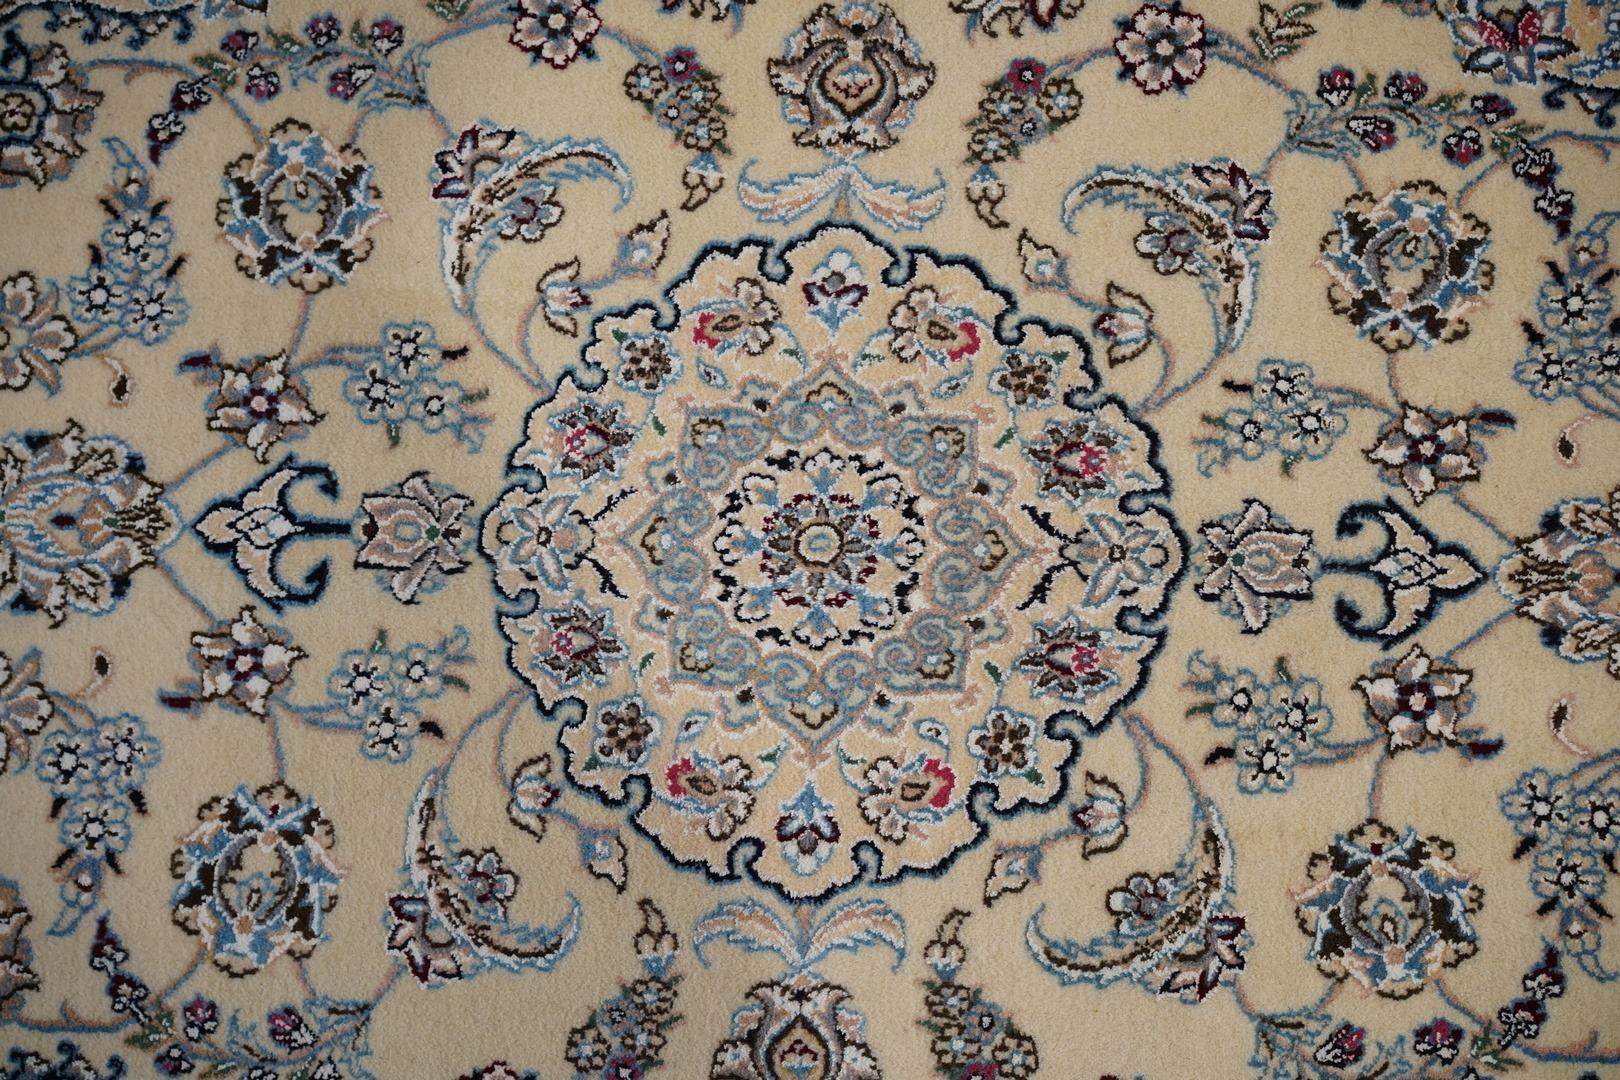 This soft and finely woven Esfahan was circa 1980 was found in a warehouse in as new condition . Soft lamb's wool in a light off white shade with several shades of pink and blues . Silk embroidery has been woven into the design as highlights -- see